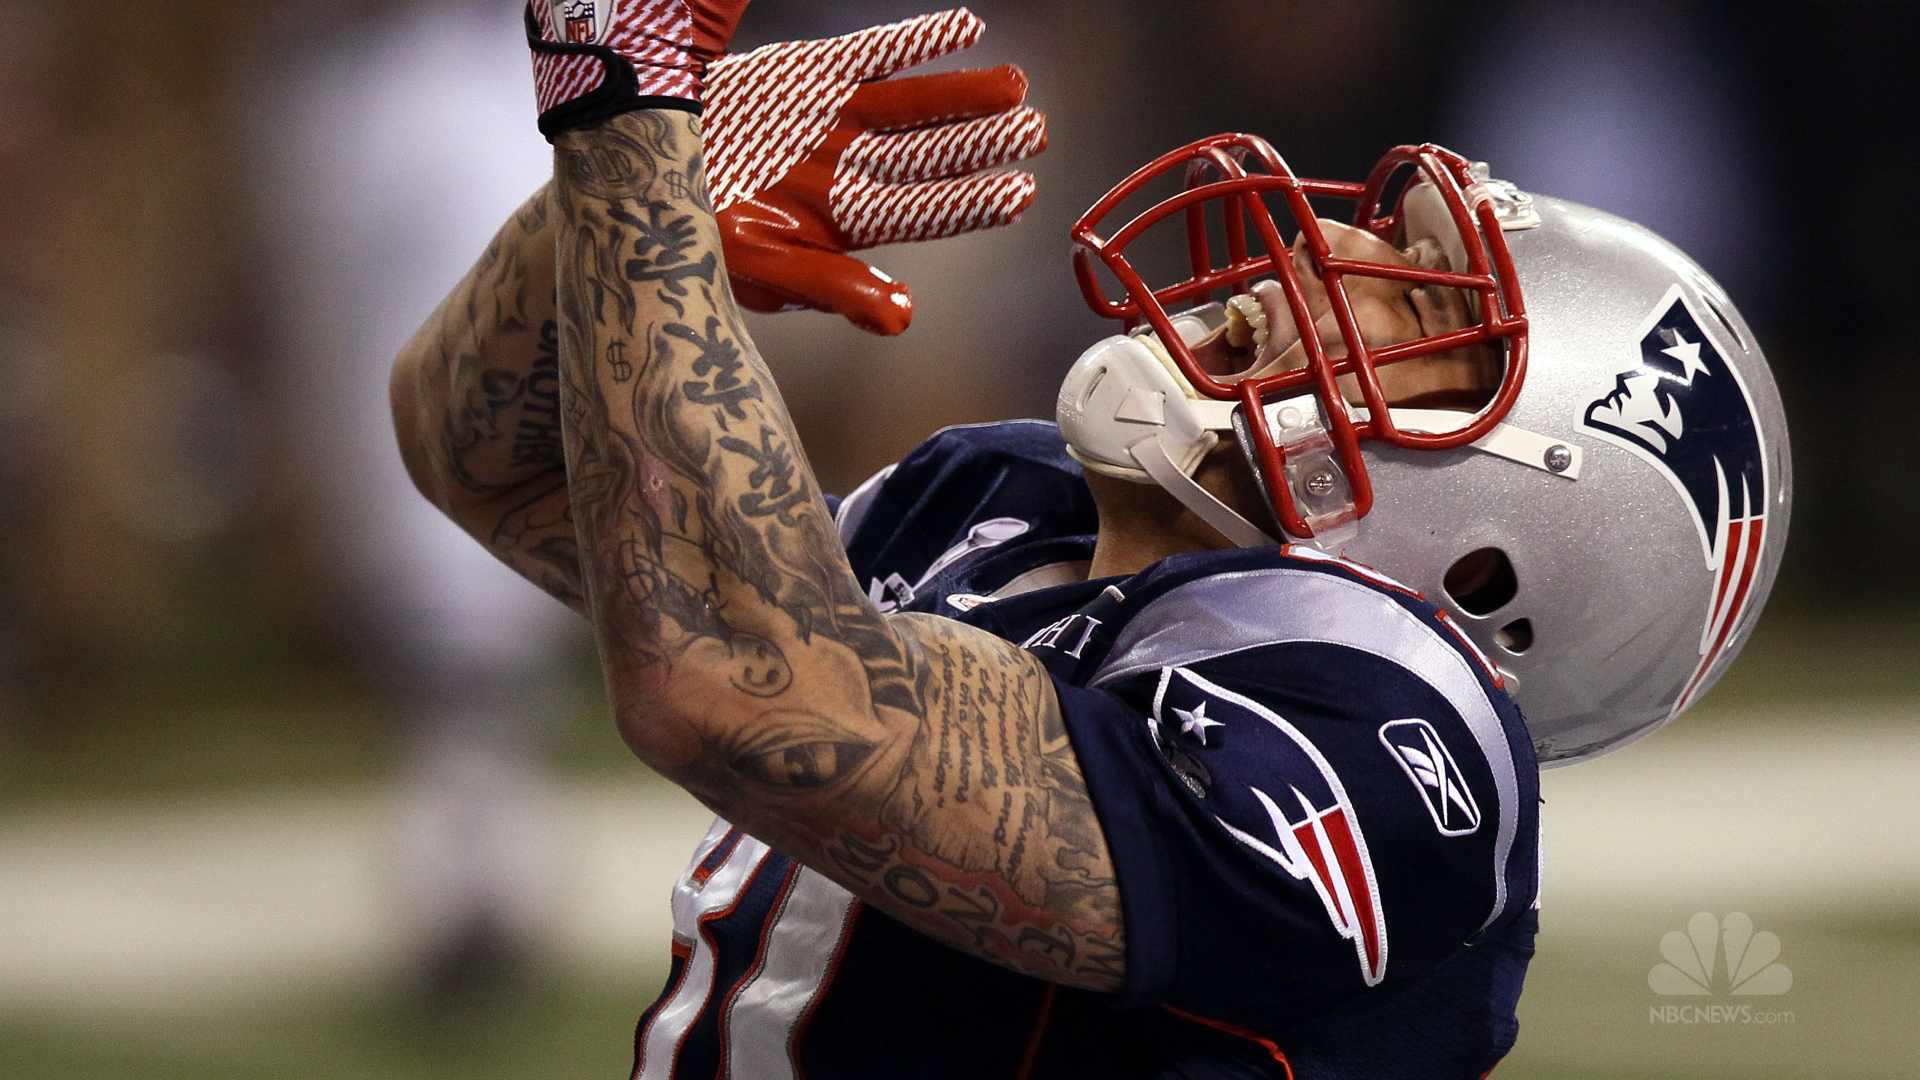 Aaron Hernandez 101: What to Know About the Case(s)